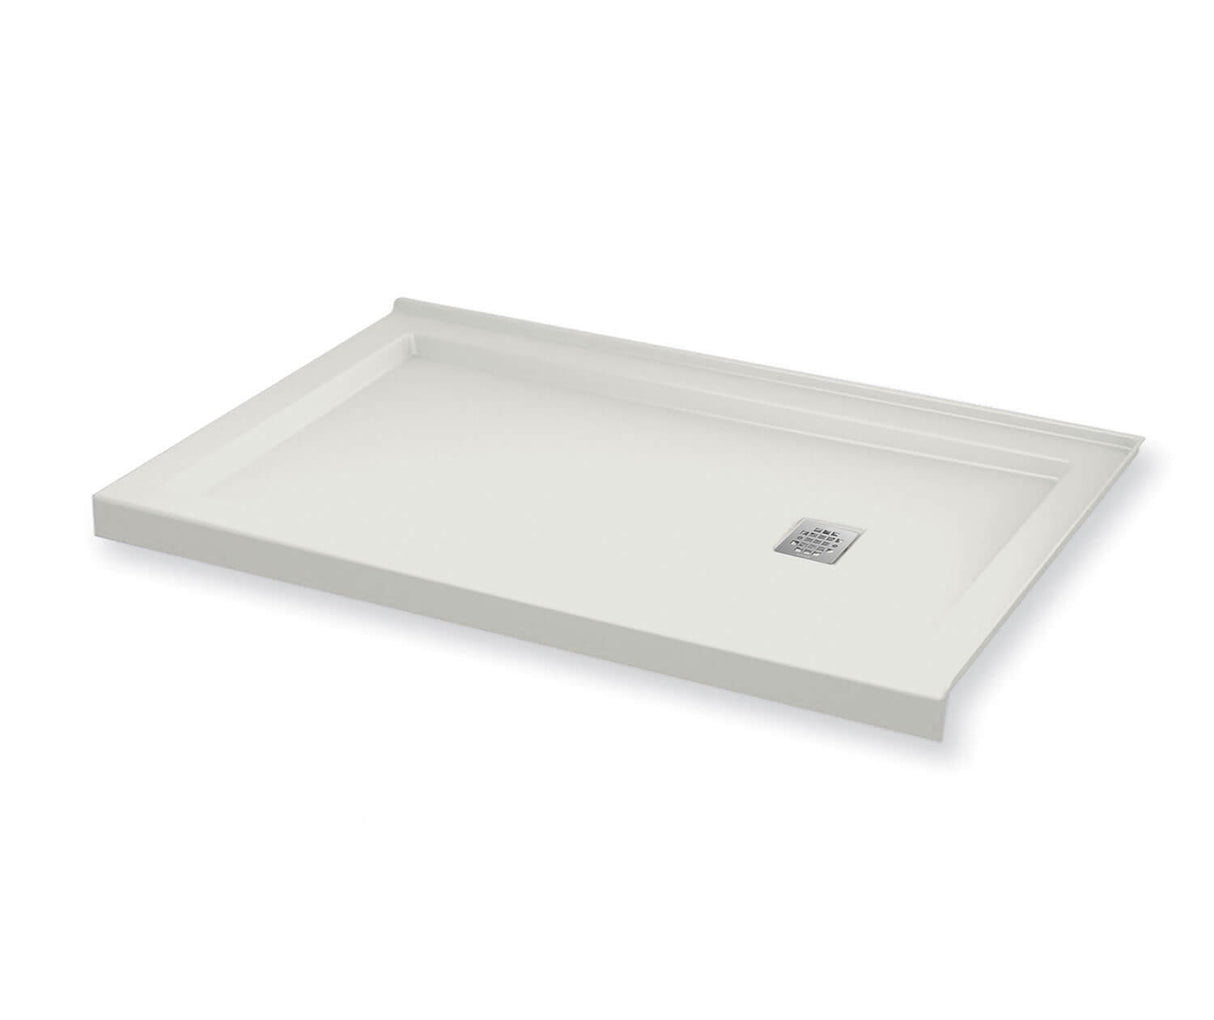 MAAX 420004-503-001-100 B3Square 6030 Acrylic Corner Right Shower Base in White with Right-Hand Drain